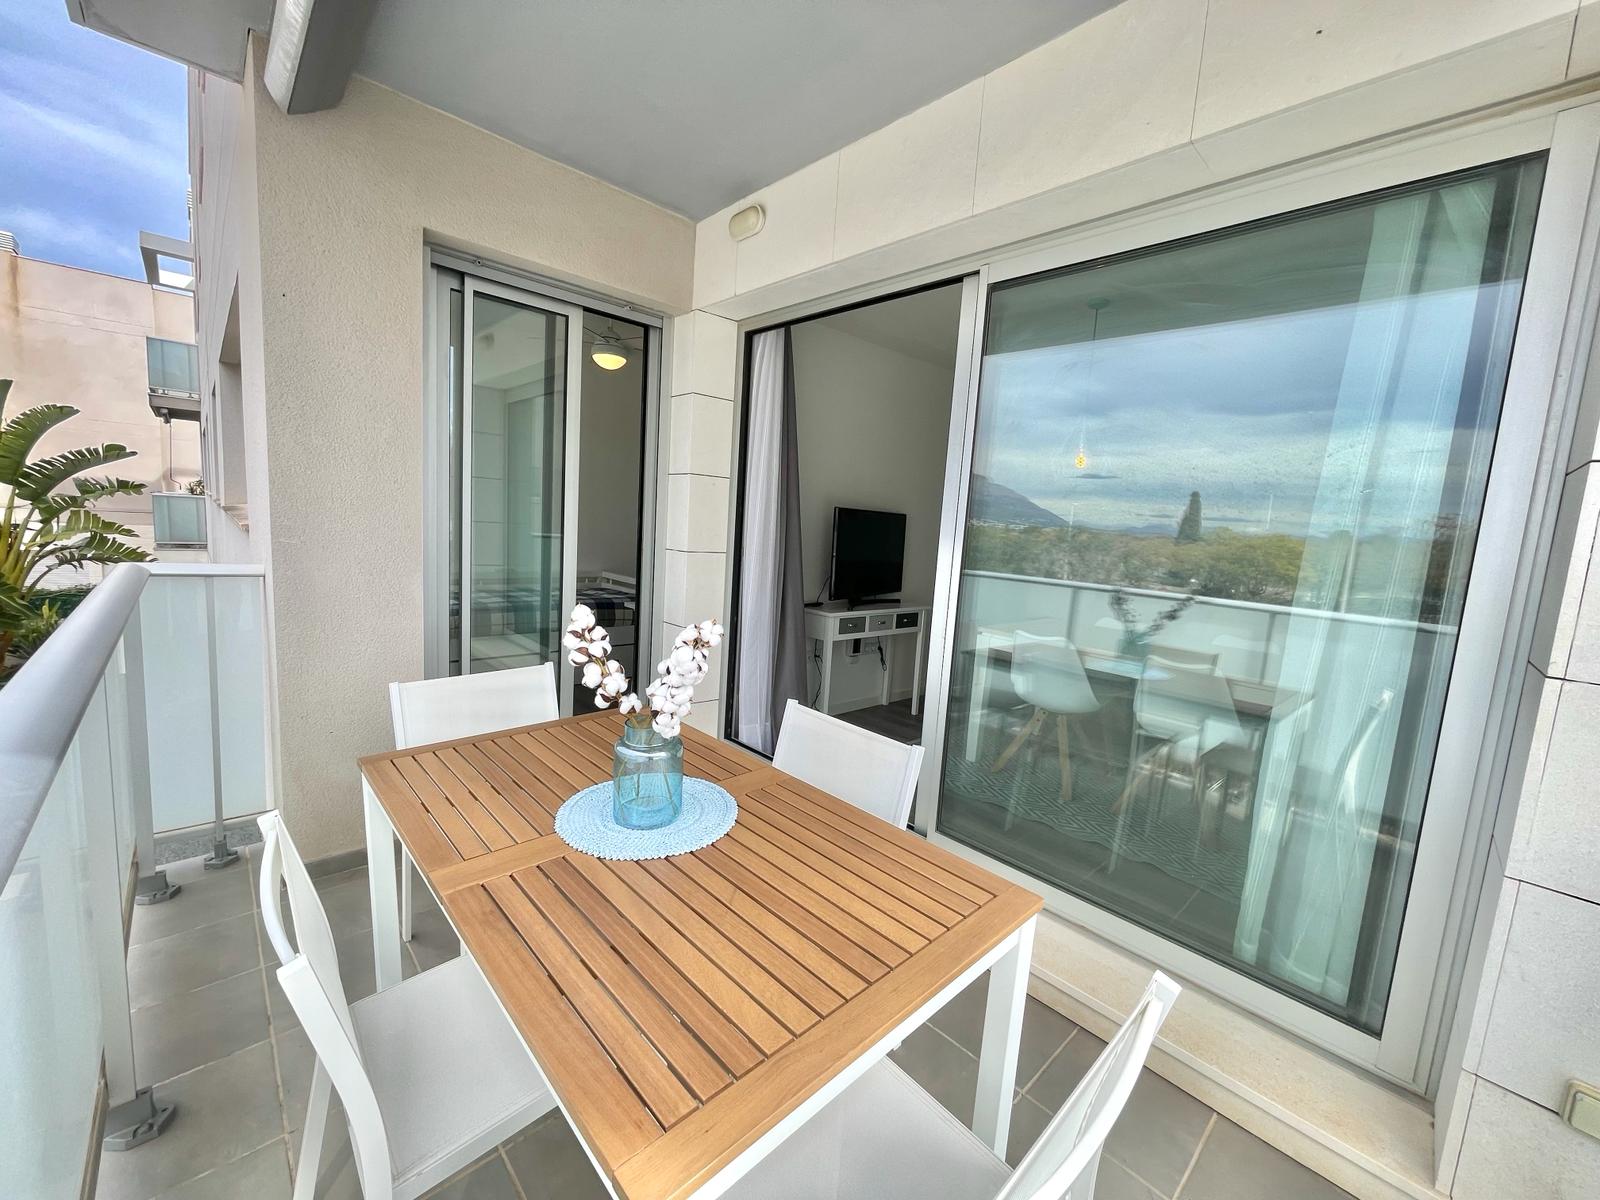 Bright 3-bedroom apartment with views of the Montgo for sale in Javea with parking and storage room